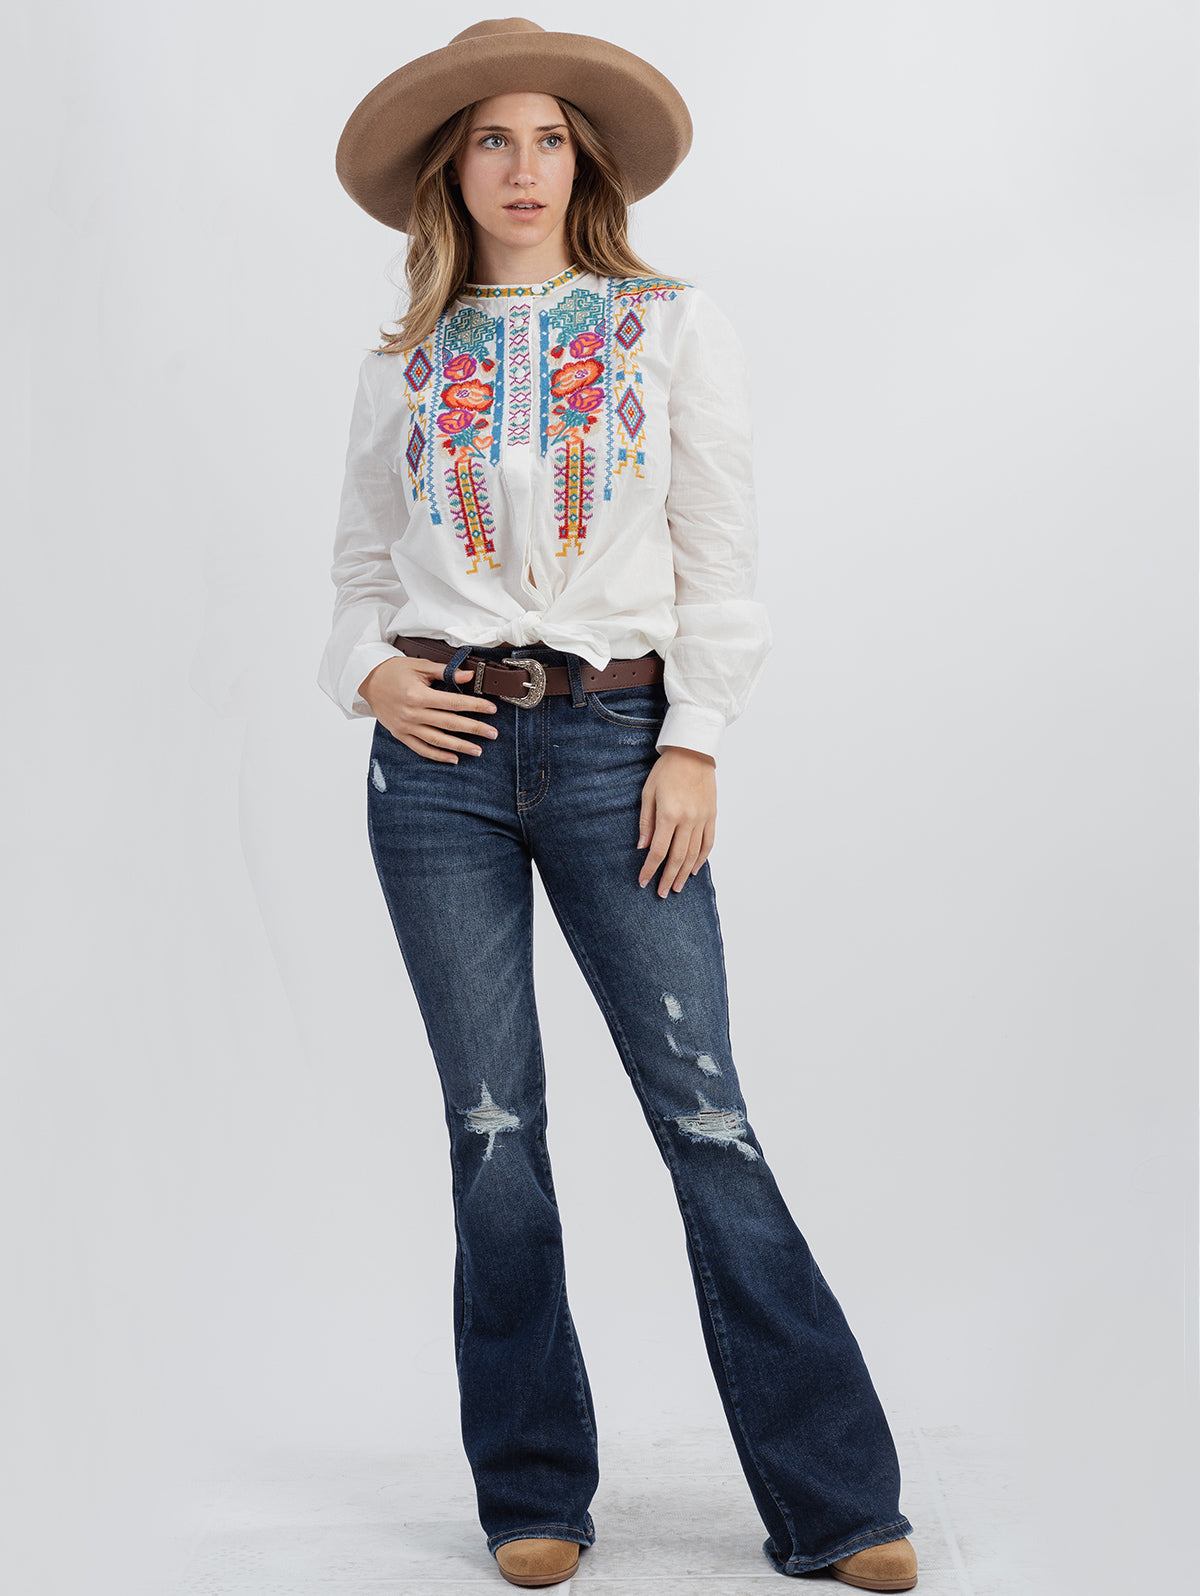 American Bling Women Aztec&Floral Embroidered Long Sleeve Shirt - Montana West World